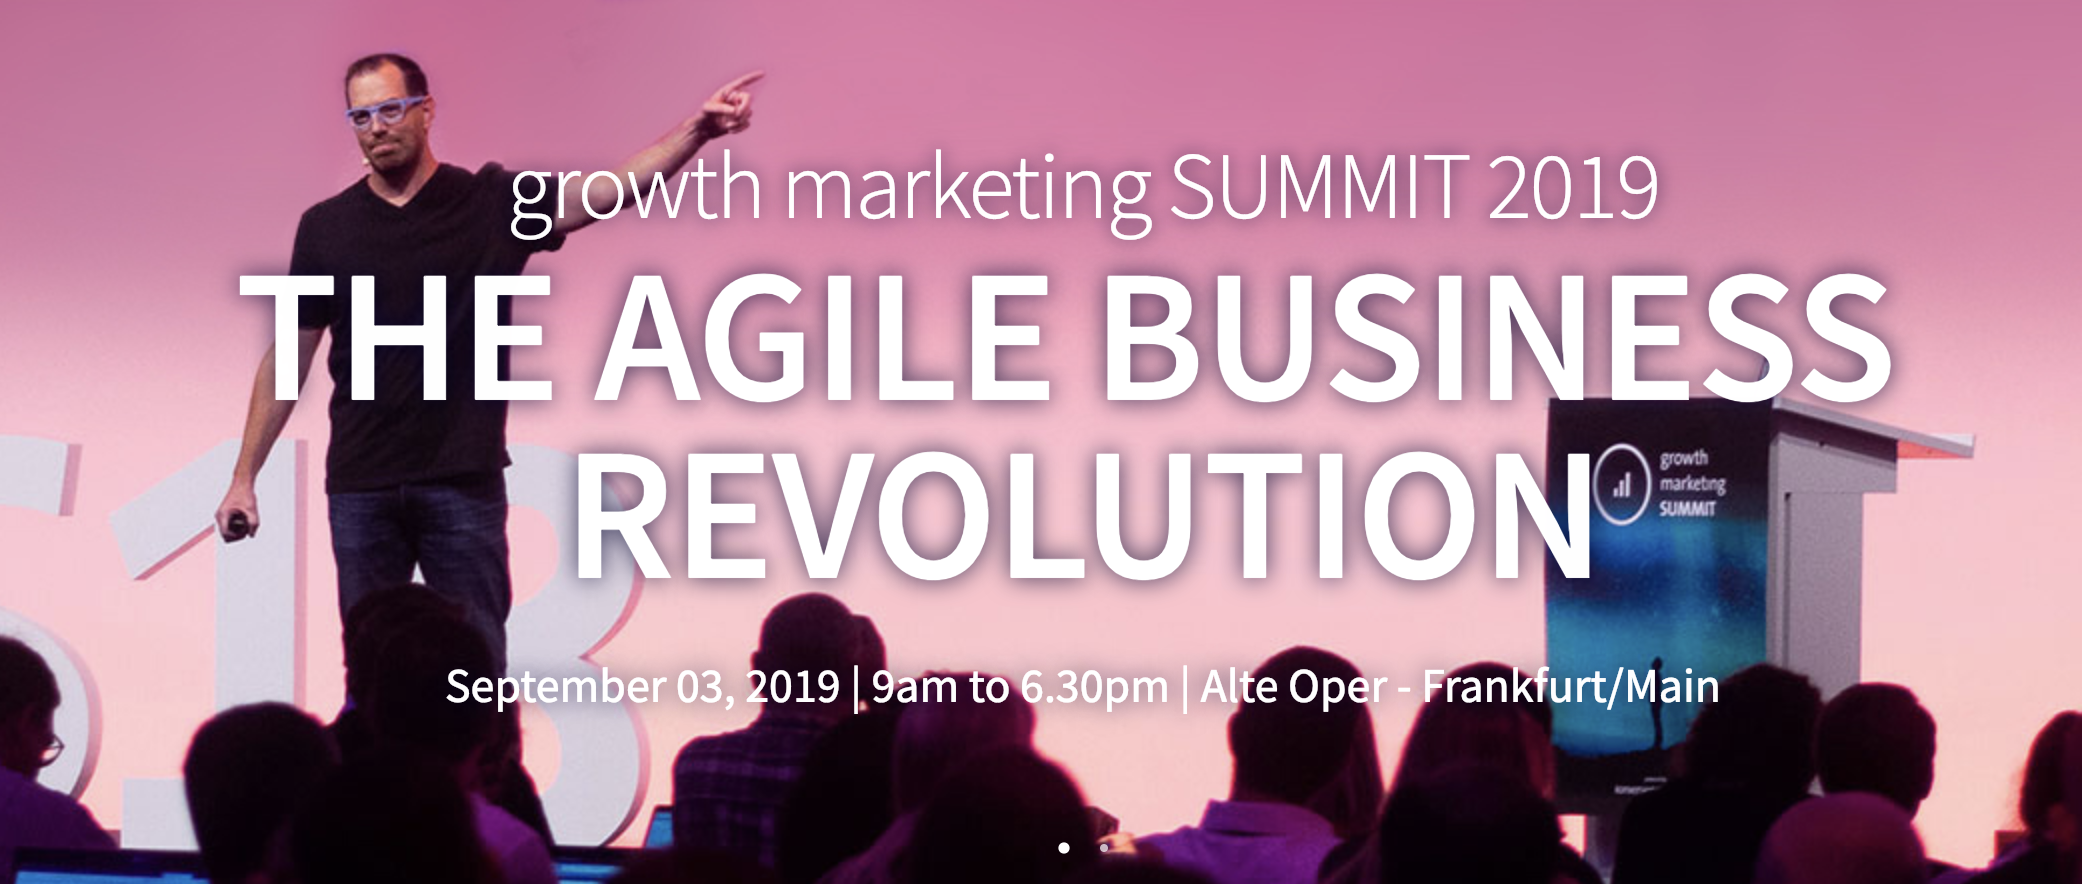 growth-marketing-summit-conference